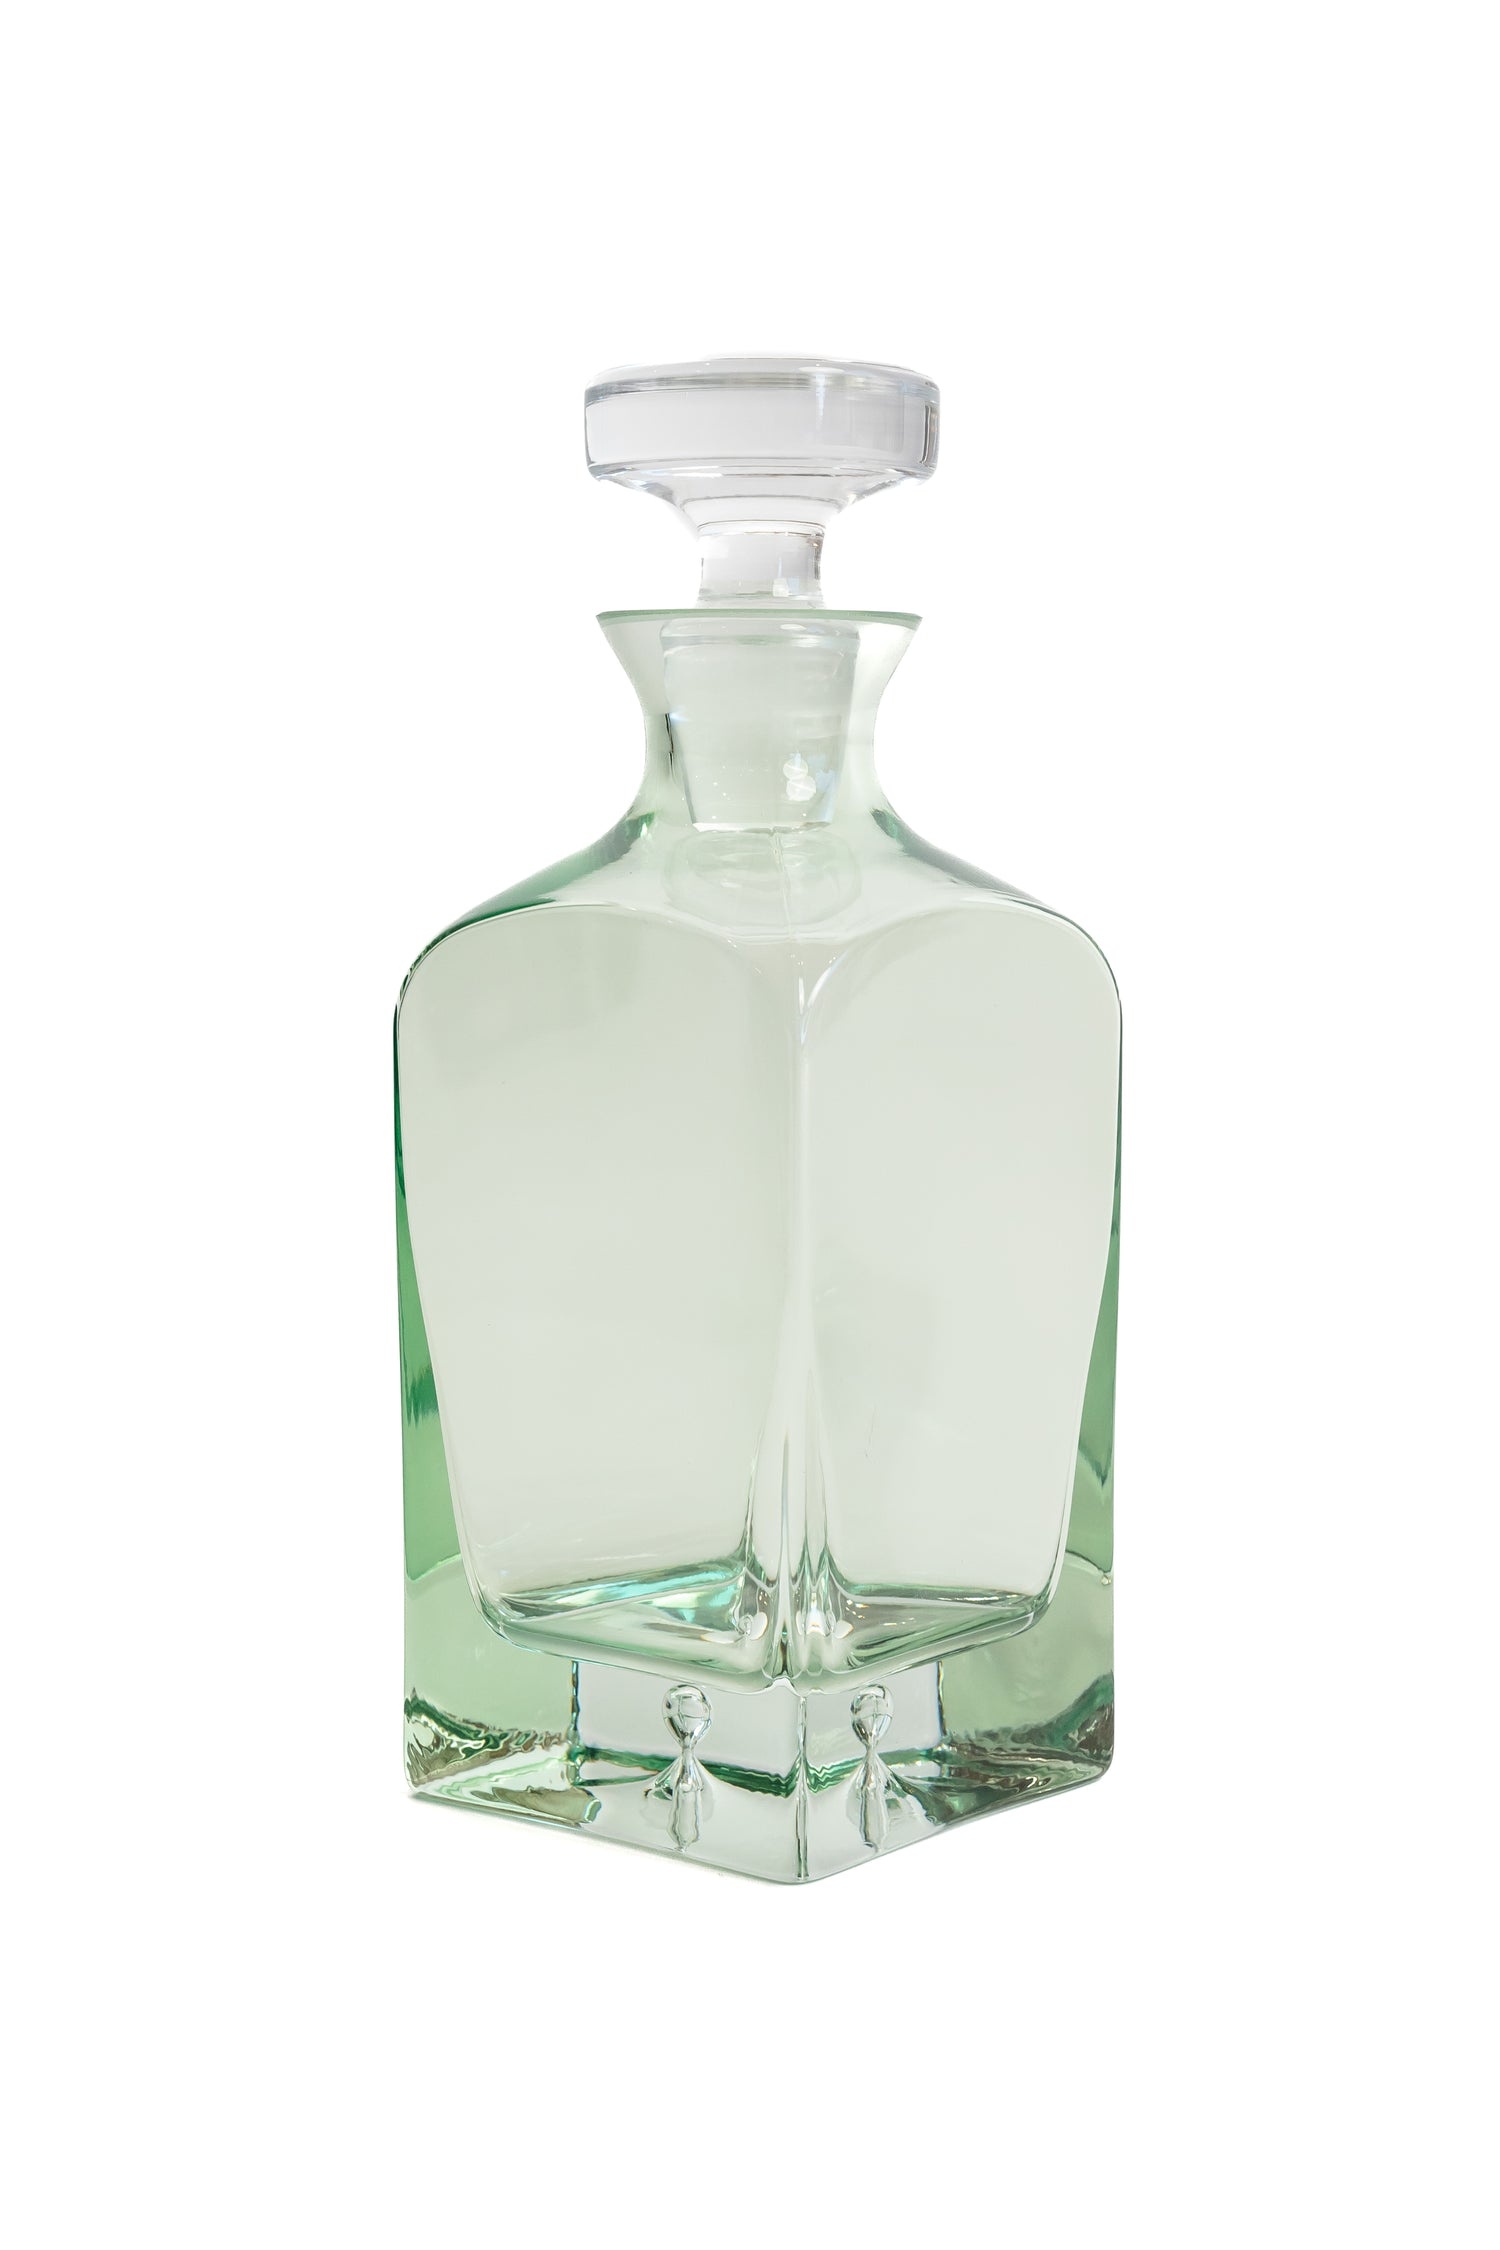 Estelle Colored Decanter - Heritage {Mint Green}